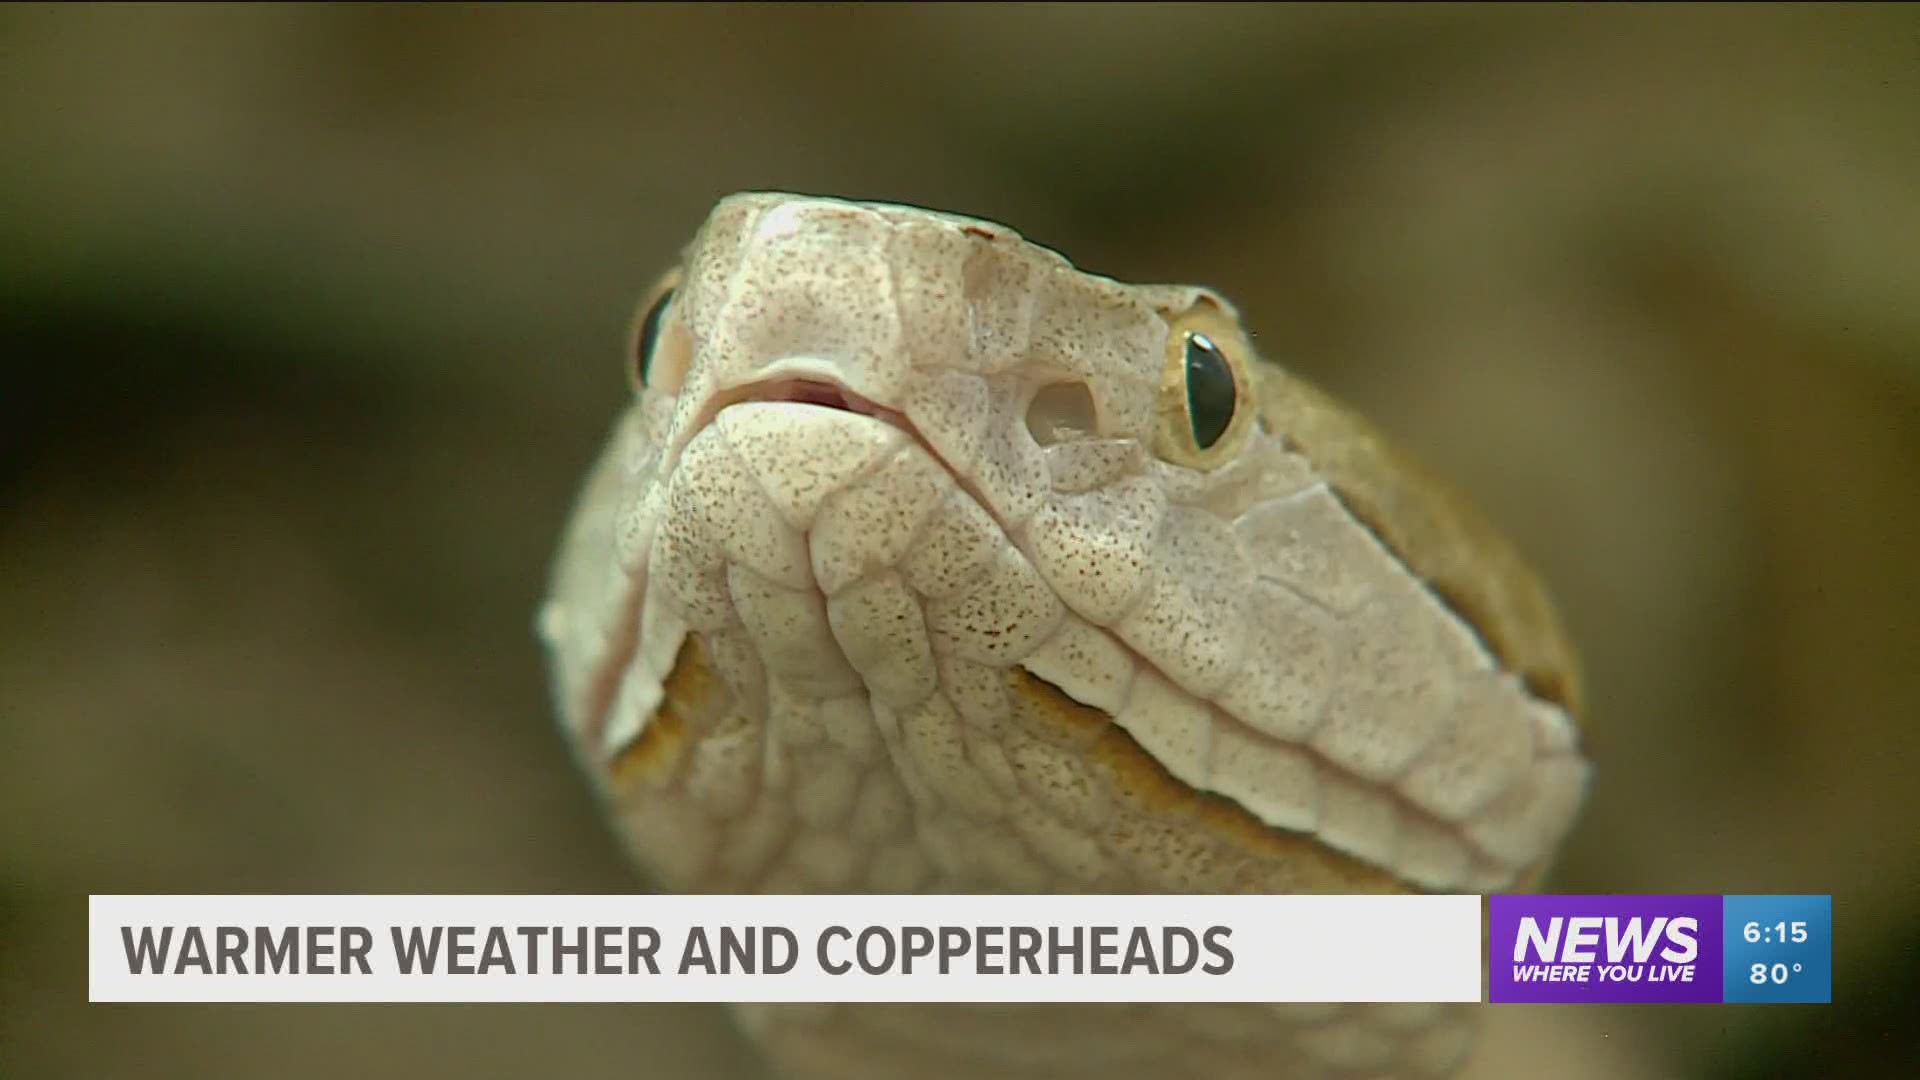 The hottest months of the year are the mating season for copperhead snakes. https://bit.ly/3gAlQXa